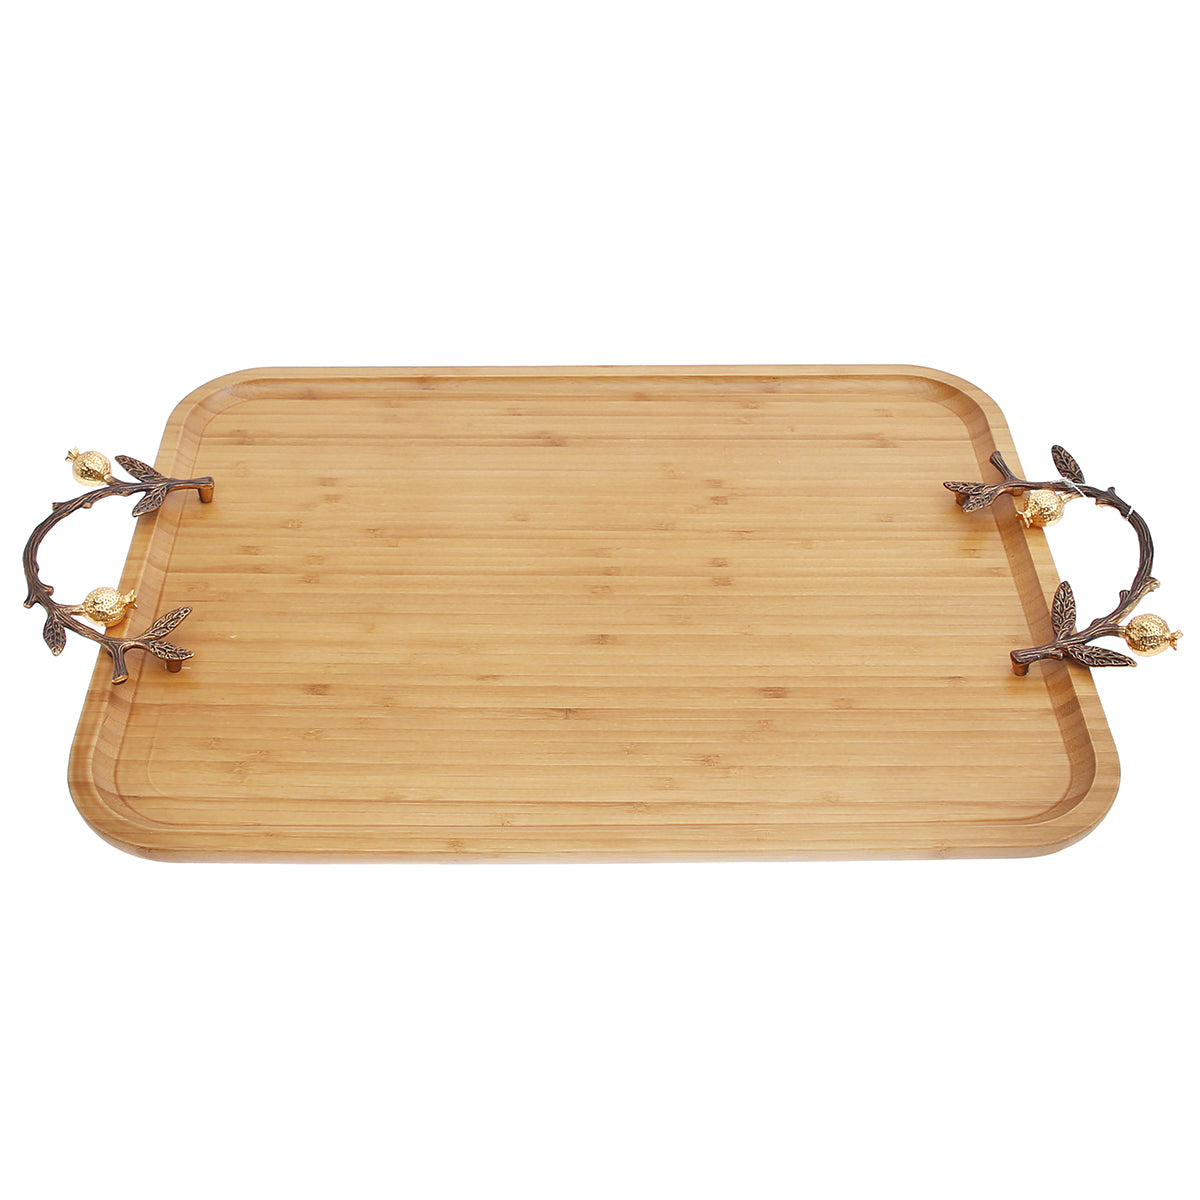 Rect Tray Wood Lrg ORCHID WB1053